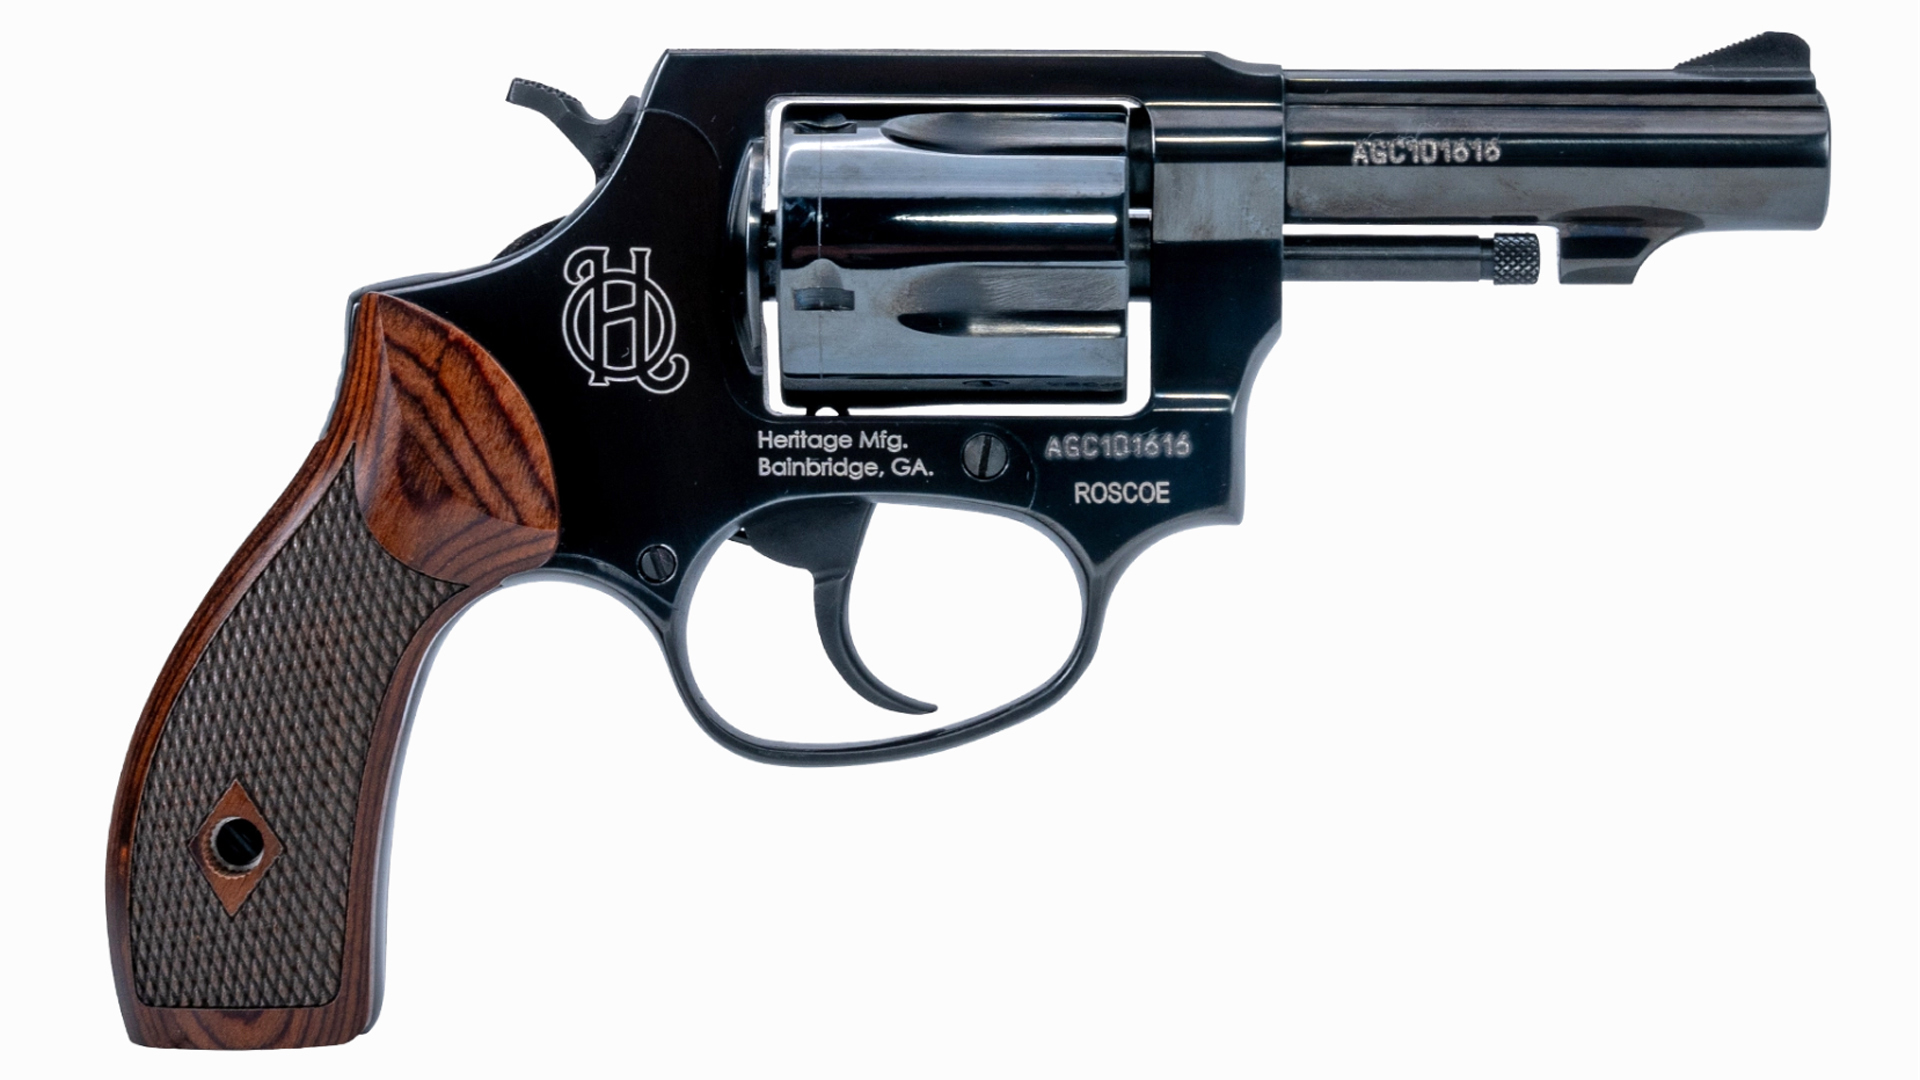 Right side profile of the Heritage Mfg. Roscoe revolver.